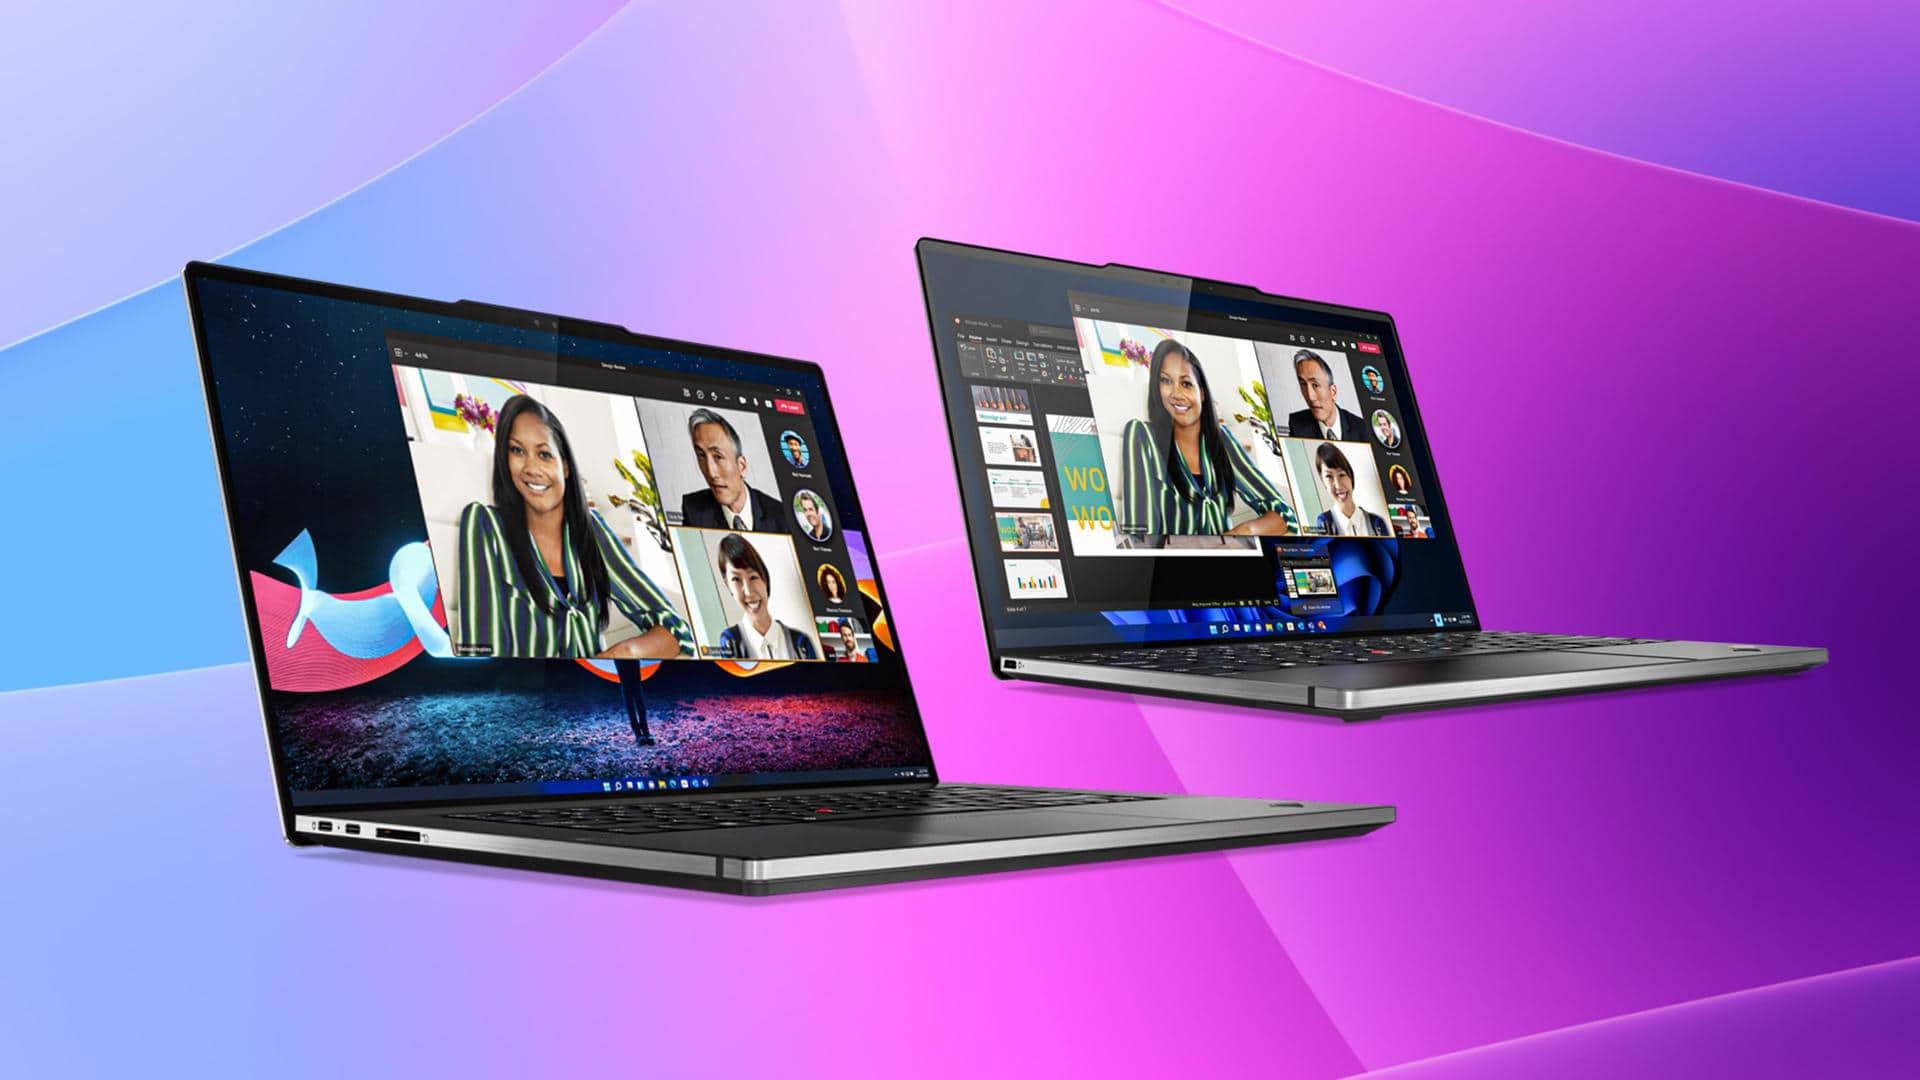 Lenovo ThinkPad Z13 and Z16 laptops launched: Check specifications